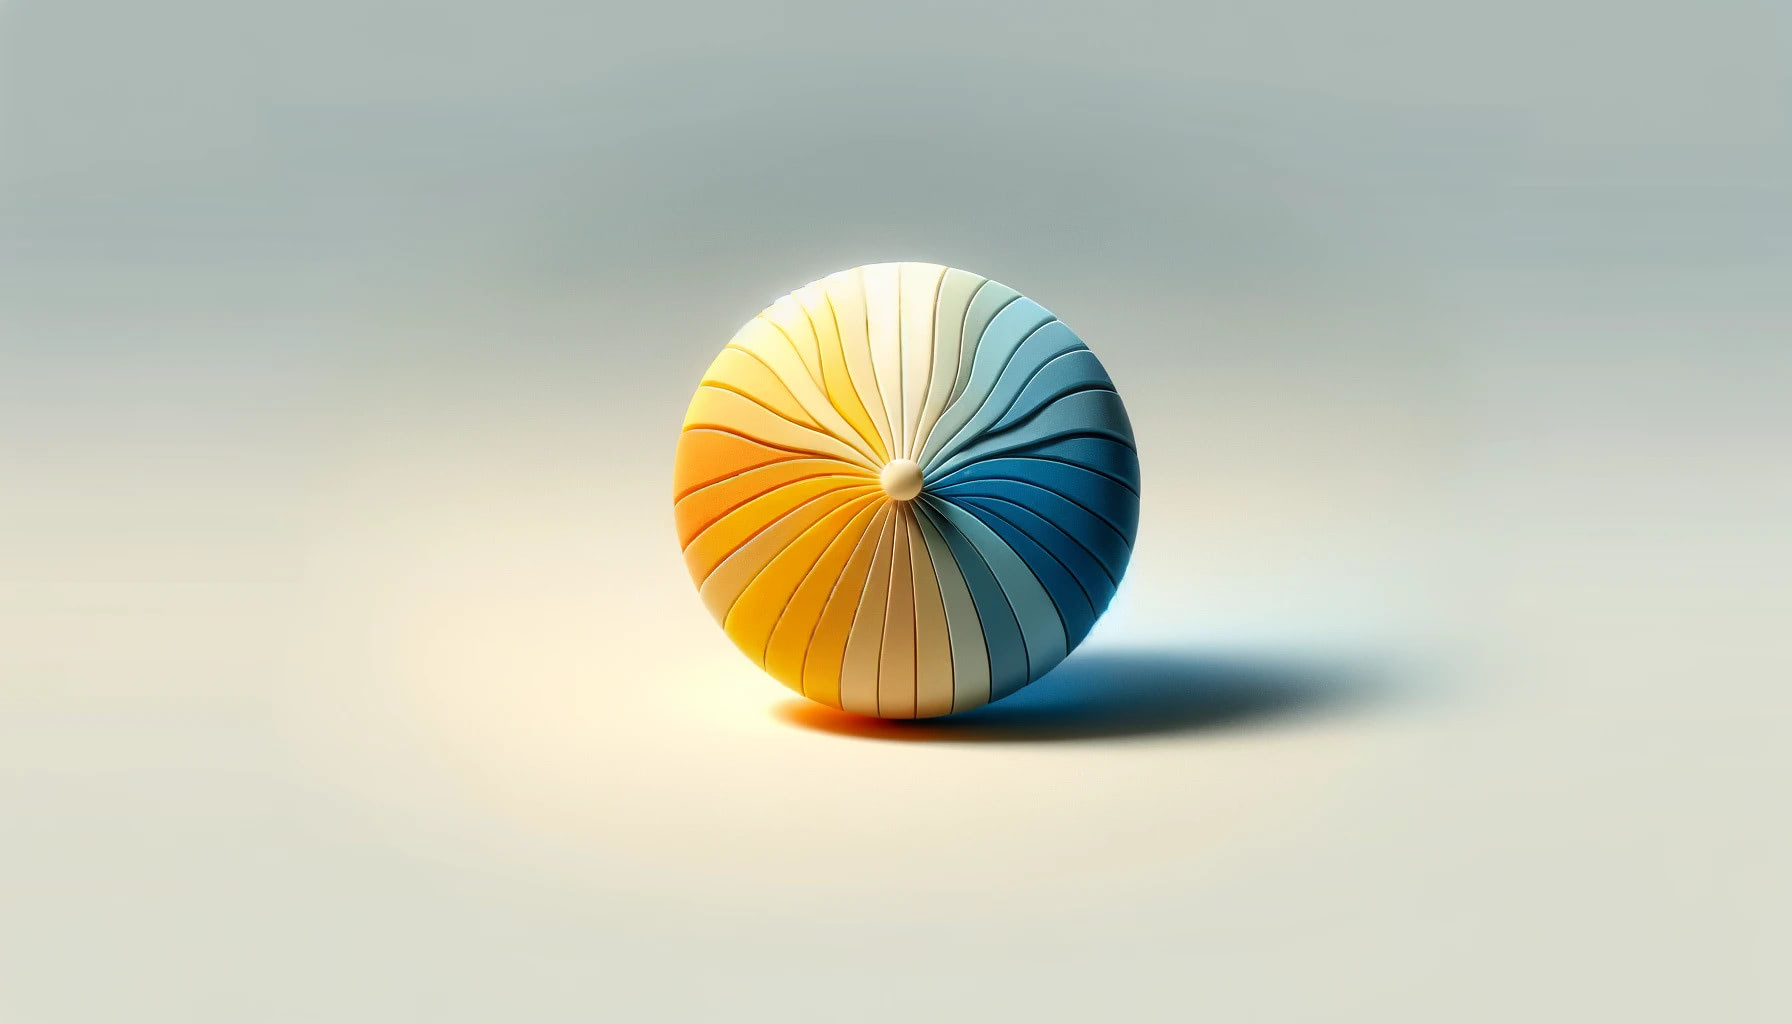 Abstract 3D image of a pressed rounded button in joyful summer colors, featuring bright yellows, vibrant oranges, and light blues, conveying a serene and quiet atmosphere.